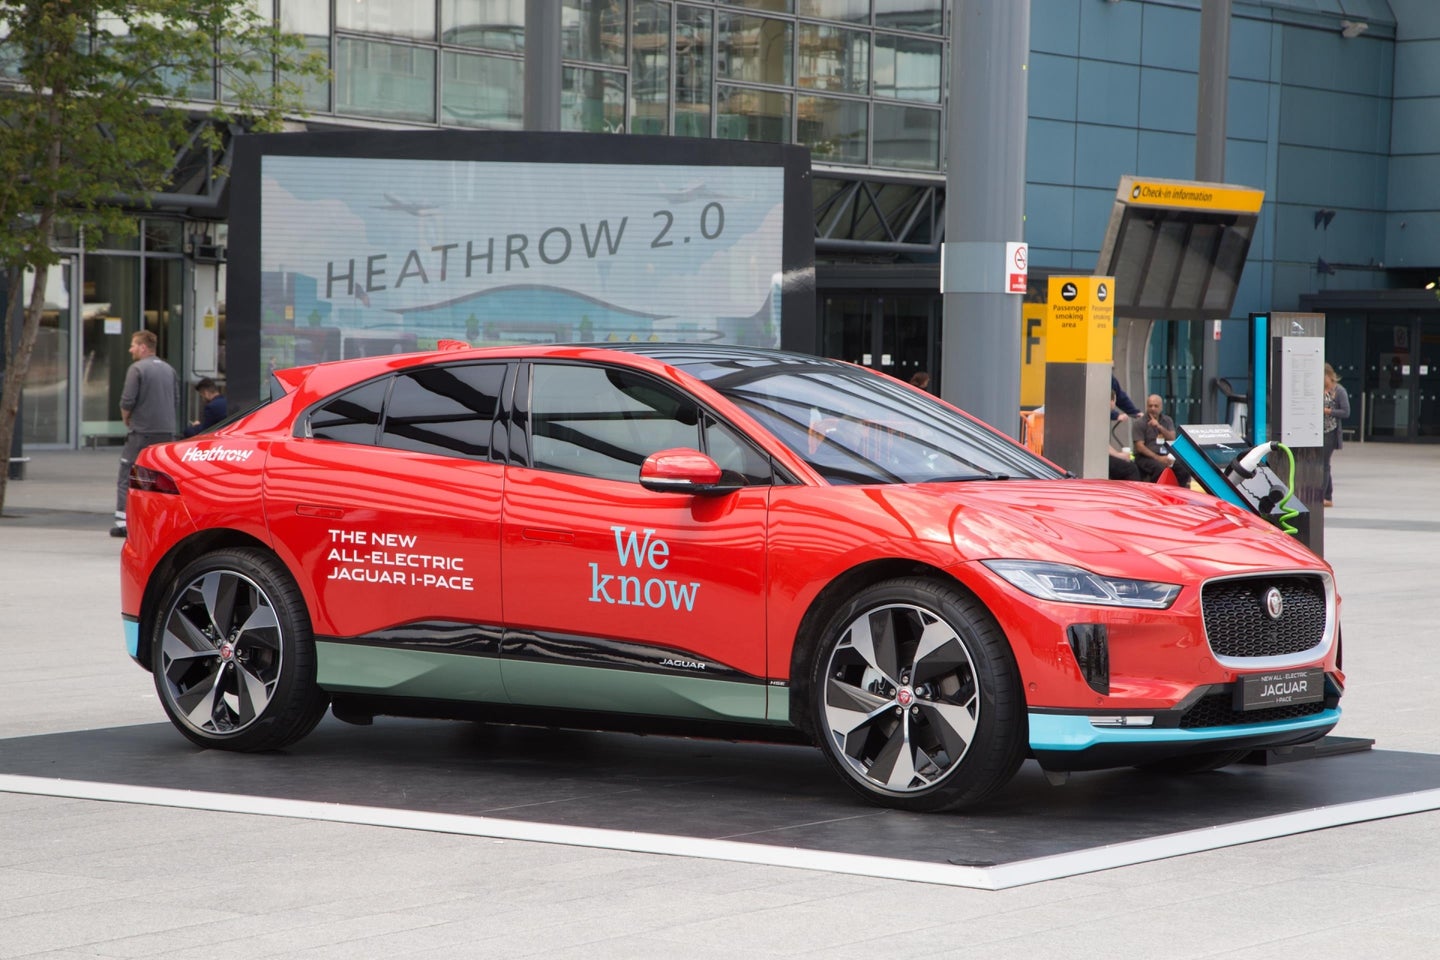 50 Jaguar I-PACE Vehicles Acquired By Luxury Chauffer Service for Heathrow Airport